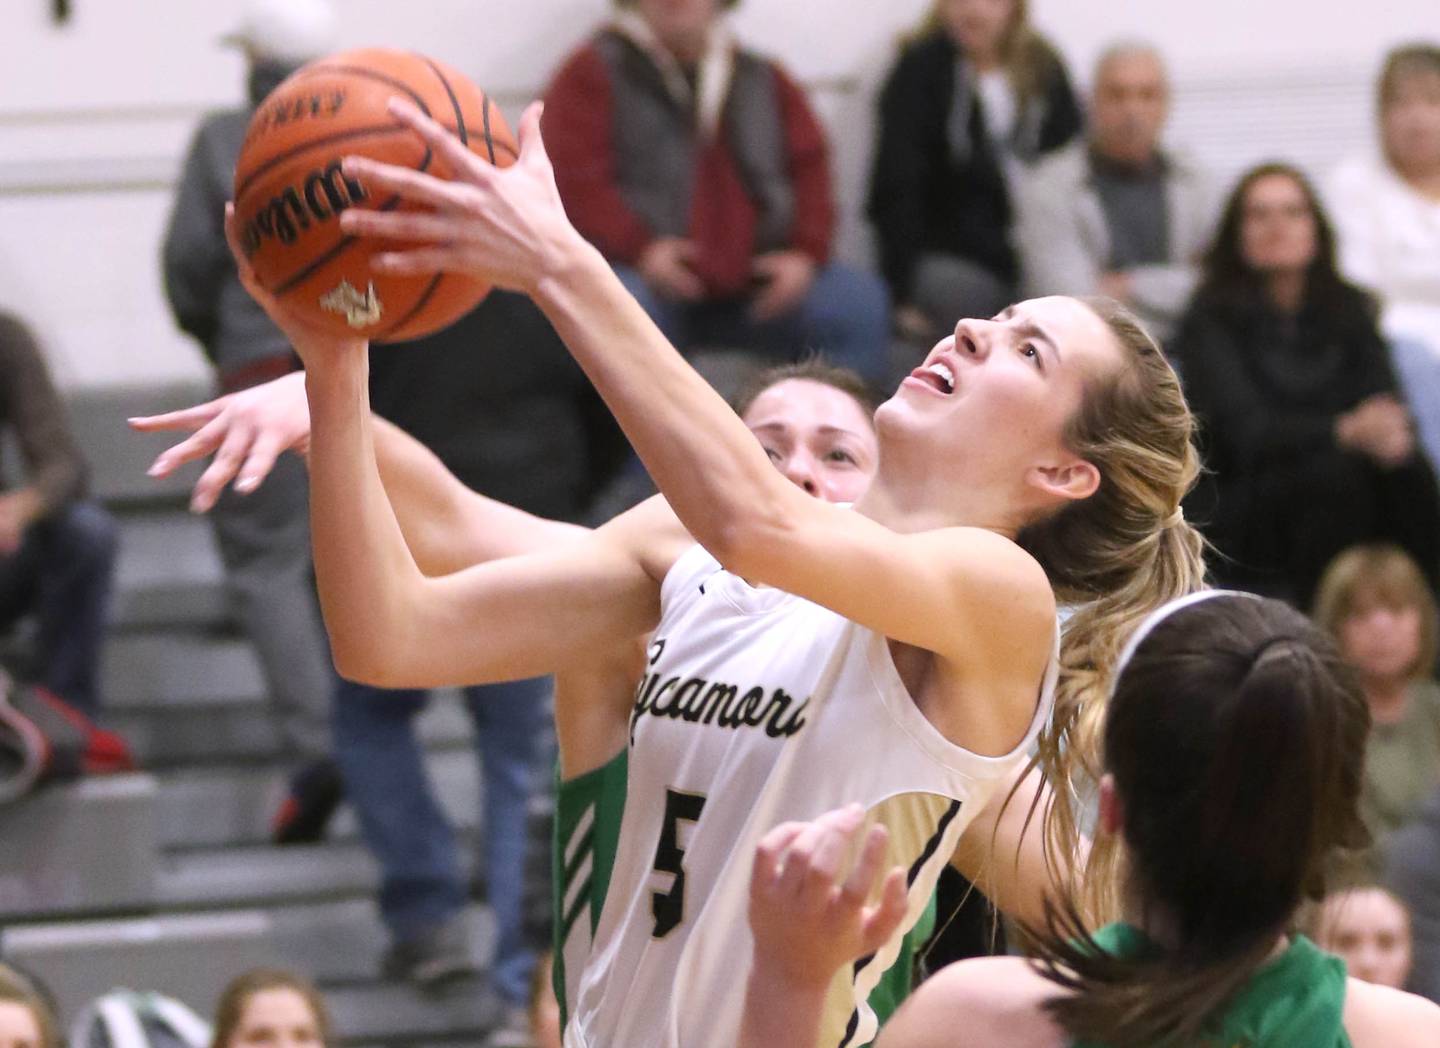 Sycamore's Faith Feuerbach shoots over Providence Catholic's Kelly Knight during their game Tuesday, Feb. 22, 2022, in the Class 3A Kaneland sectional in Maple Park.